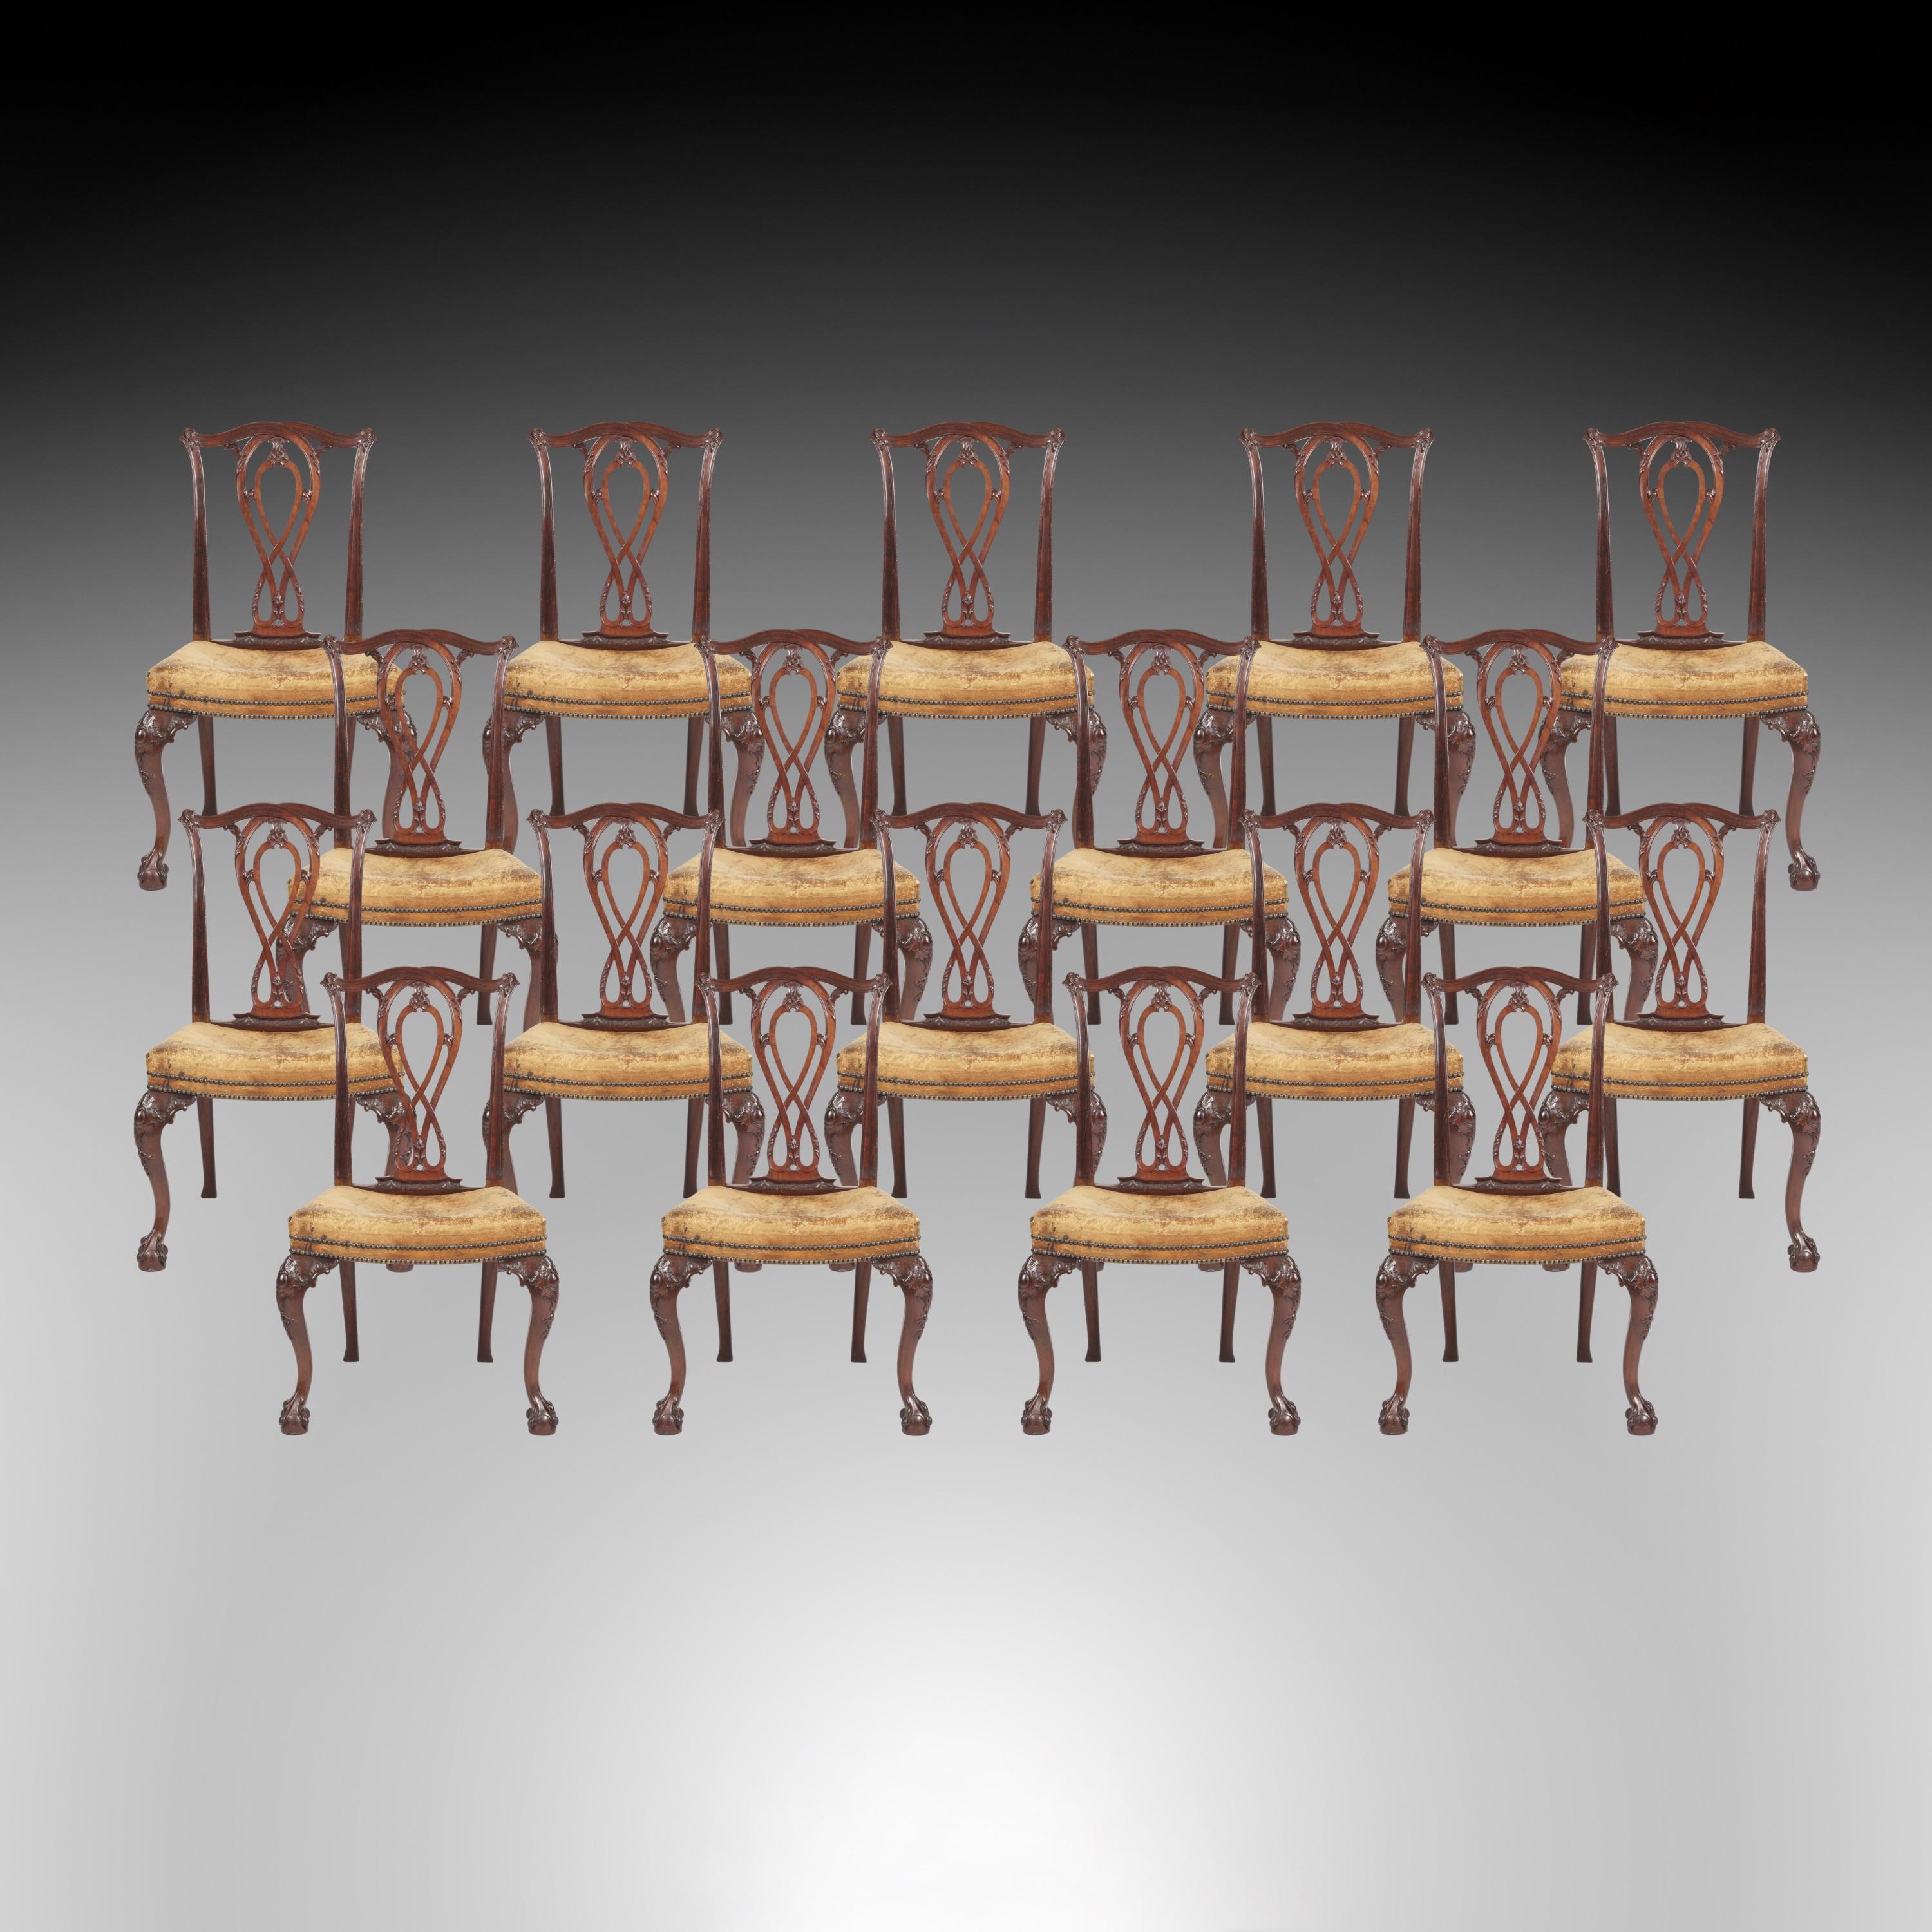 A Long Set of Eighteen Dining Chairs in the Early Georgian Manner

Constructed in mahogany, after a design by Robert Manwaring; rising from ball and claw cabriole legs, with foliate carved ears, with kick away legs to the rear; the dished seats